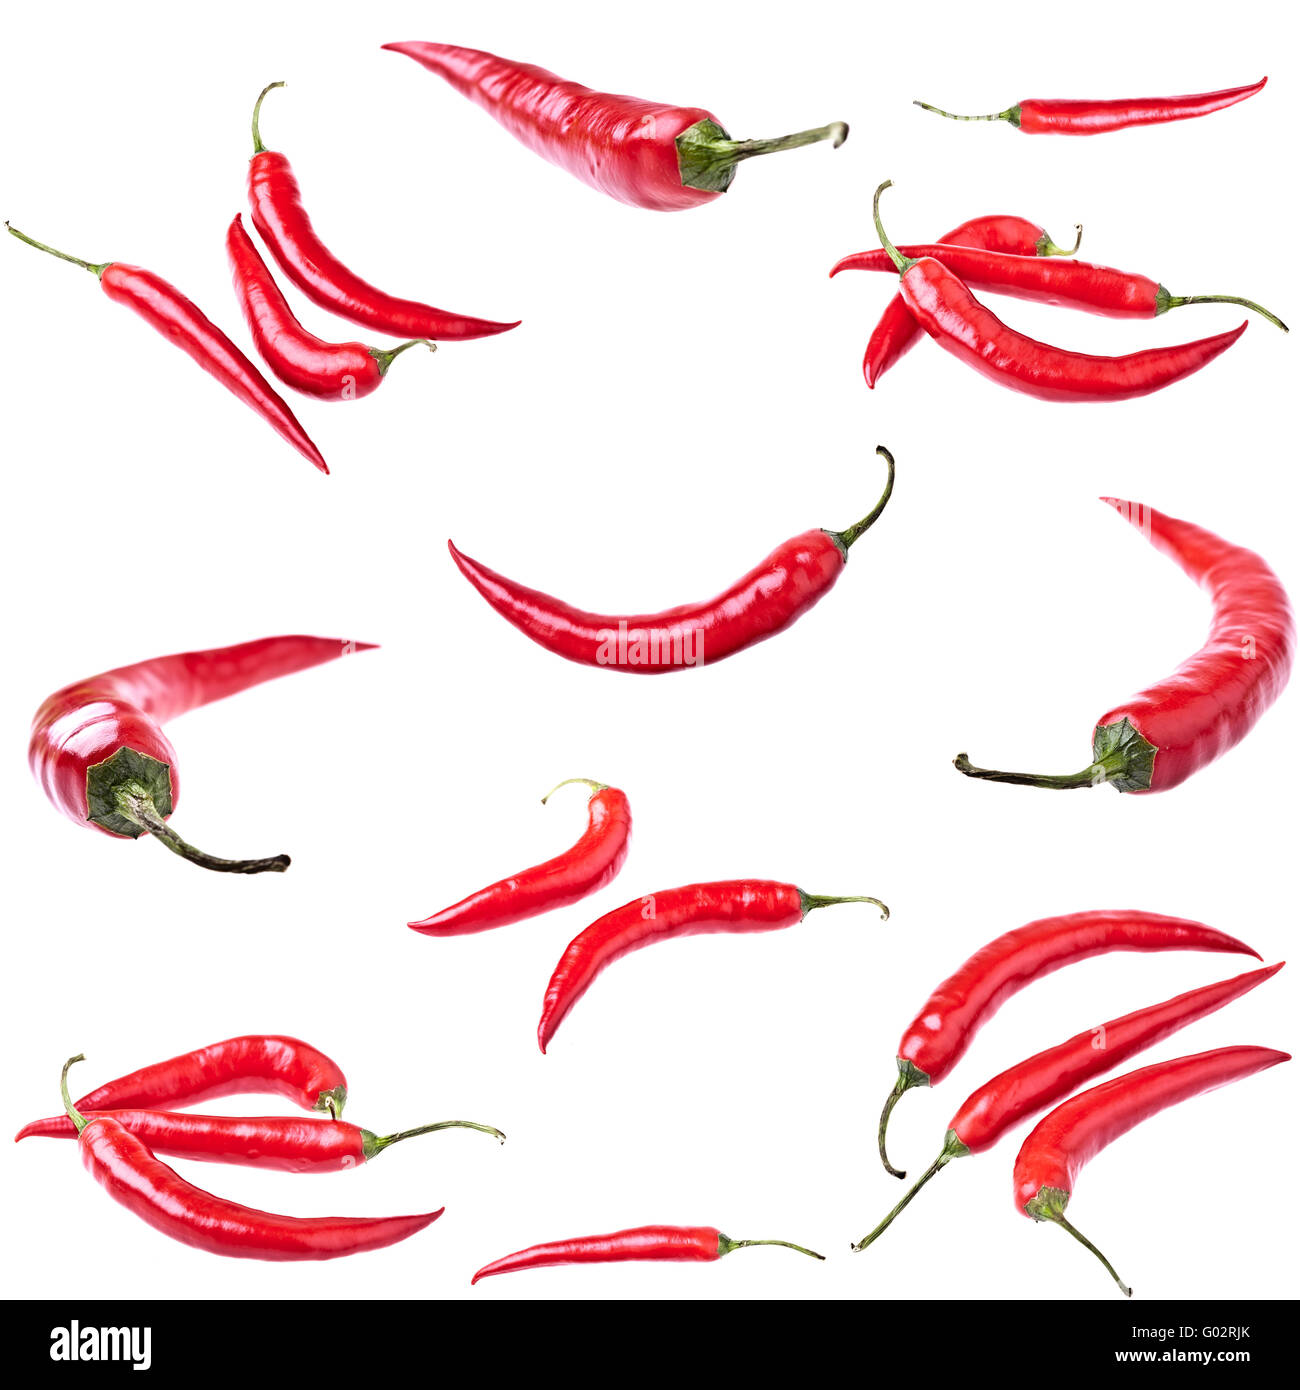 Red Hot Chili Peppers - isolated Stock Photo